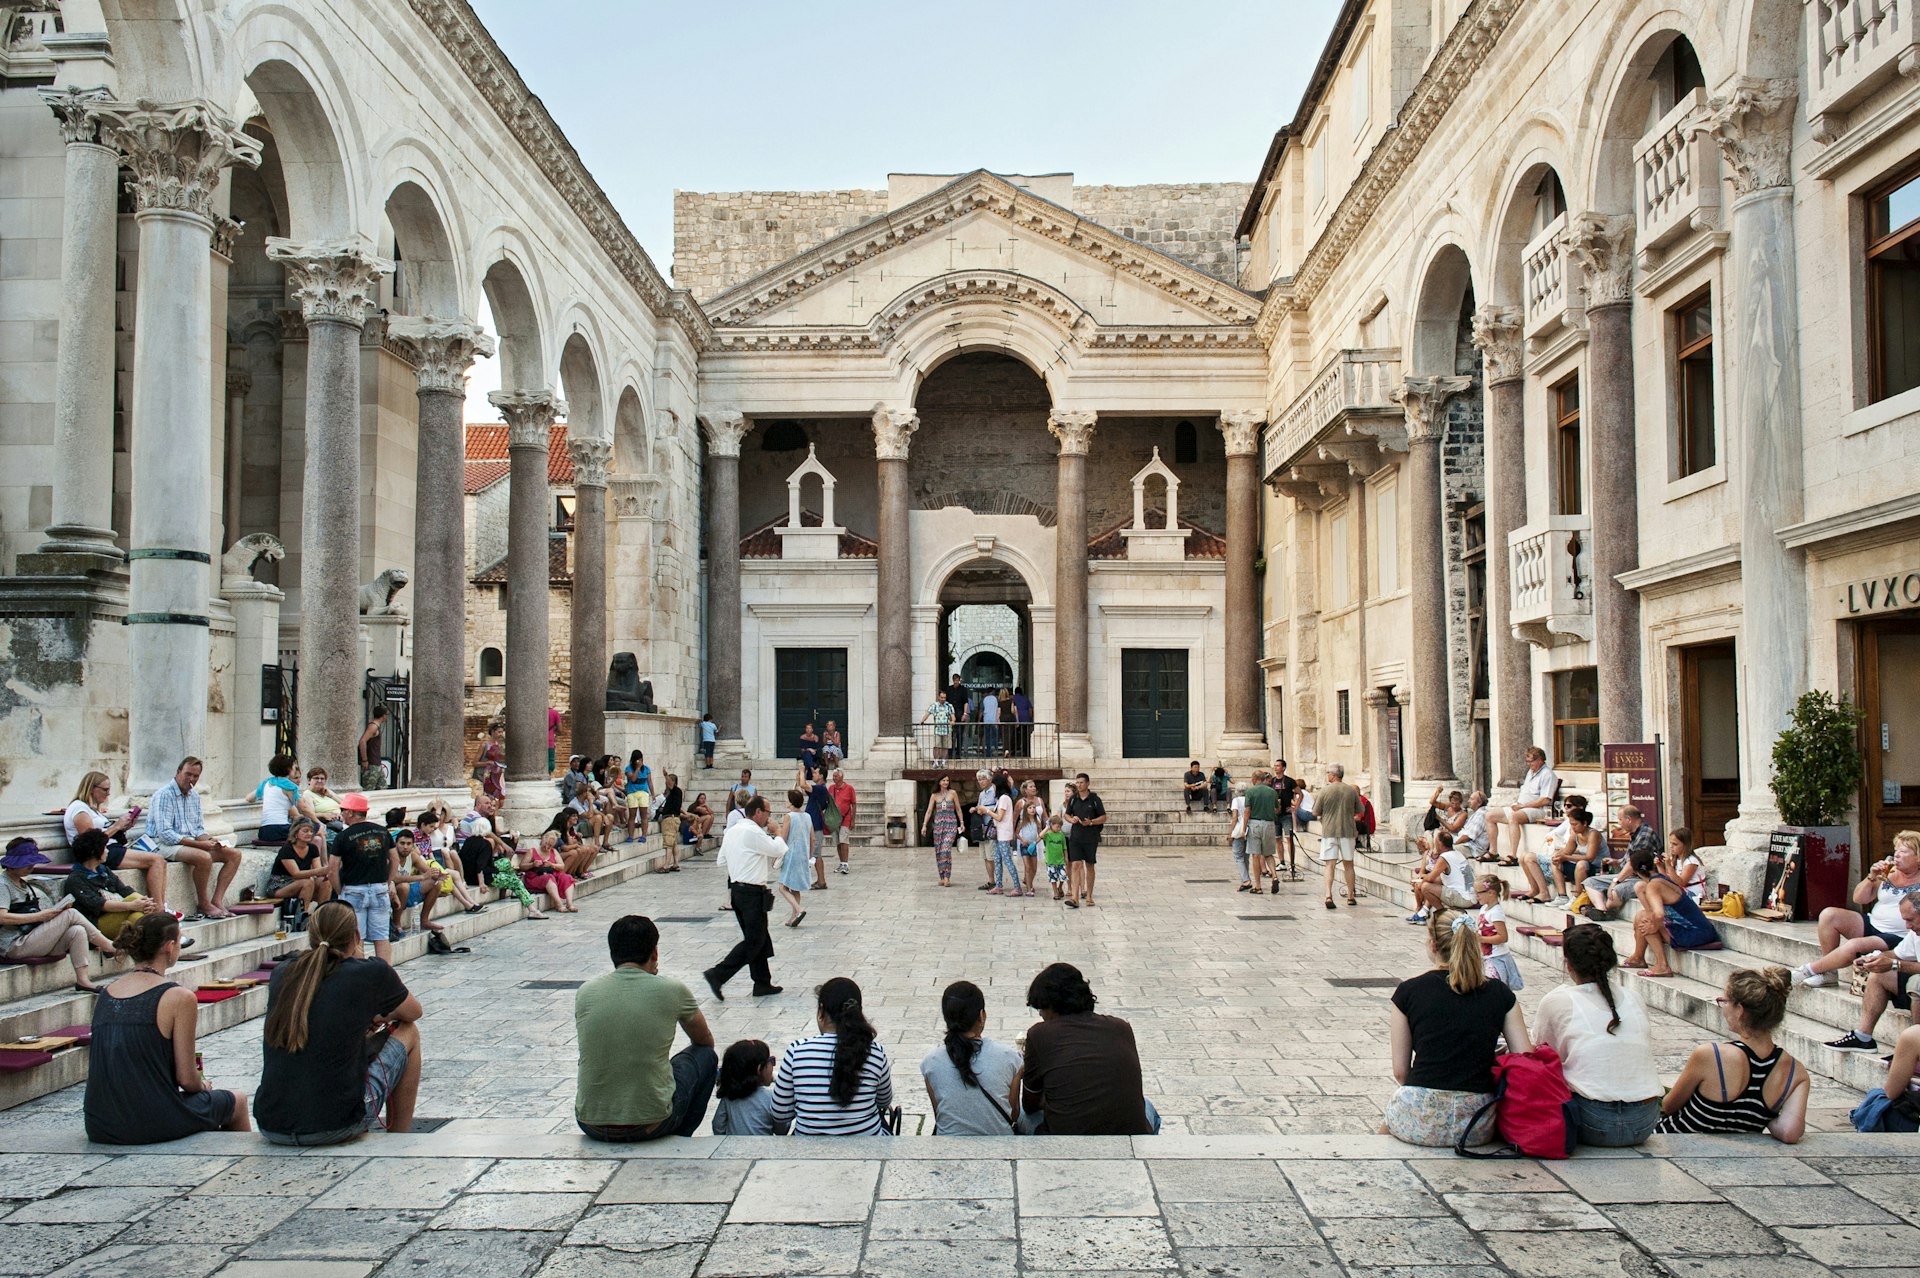 The crowded courtyard at Diocletian's Palace in Split